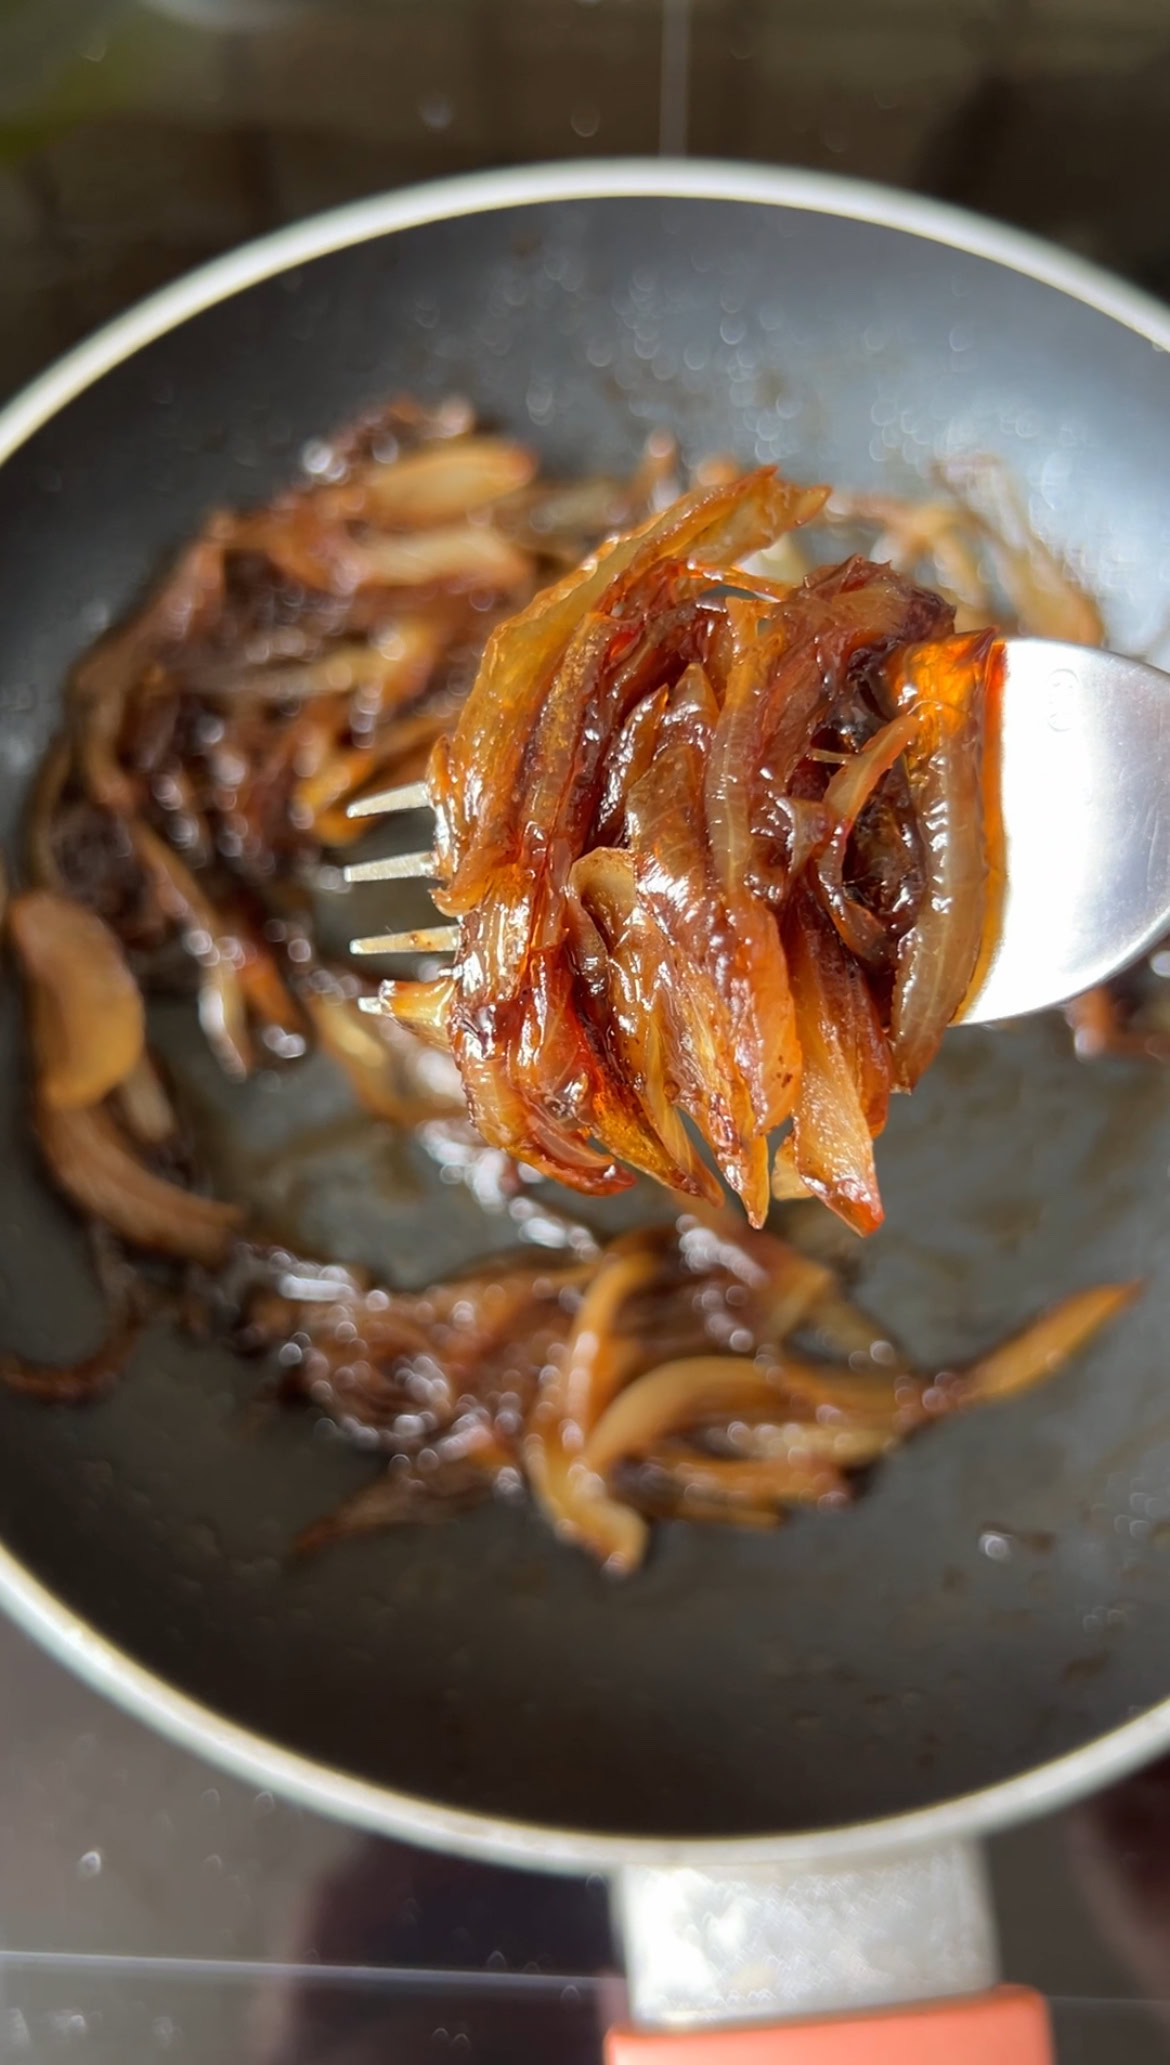 A few slices of onion confit held together with a fork.